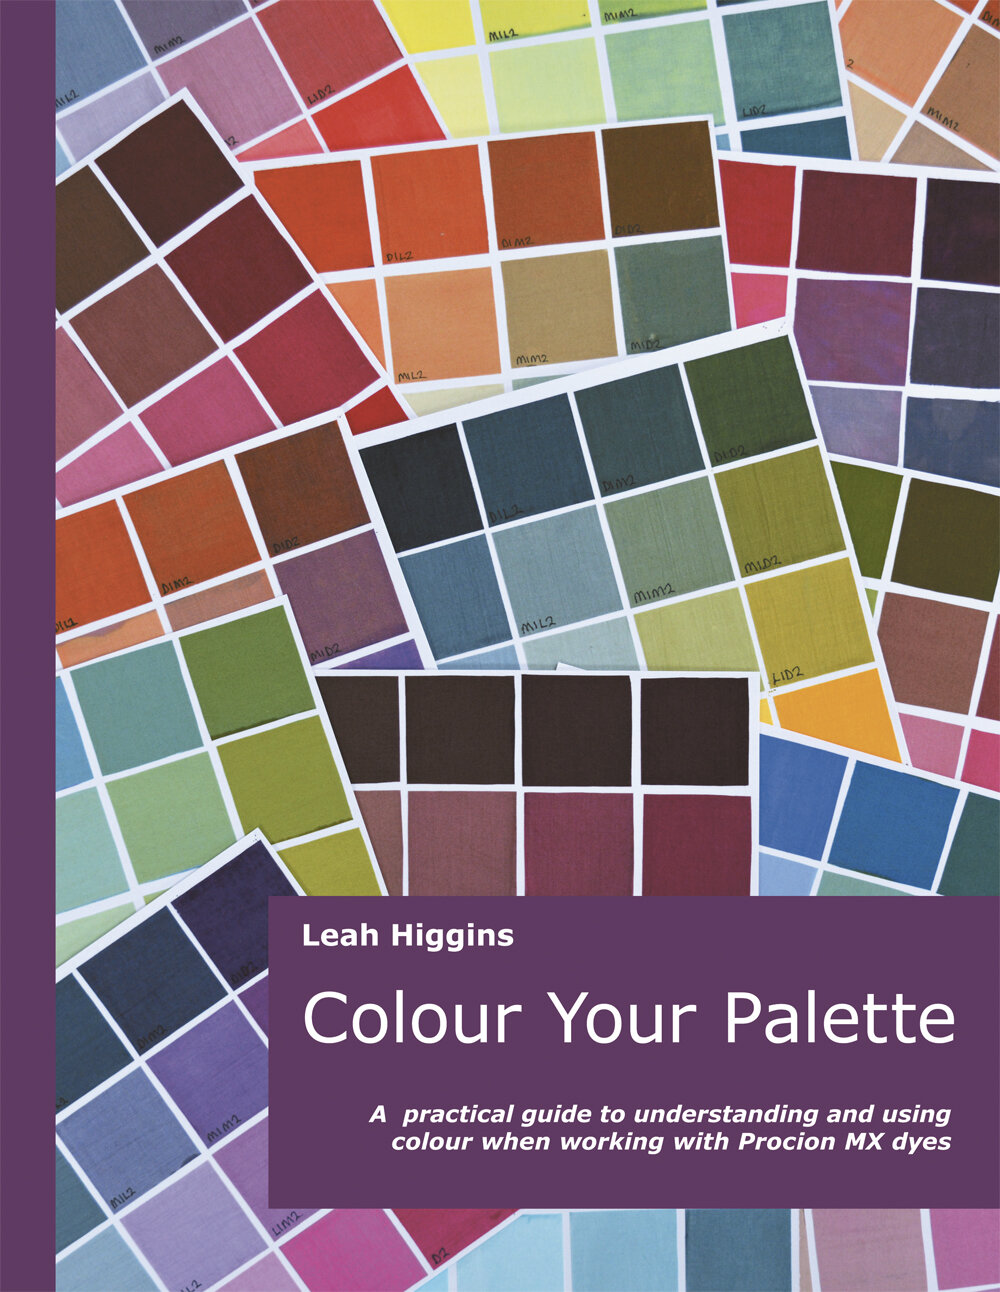 Colour Your Palette front cover for website.jpg